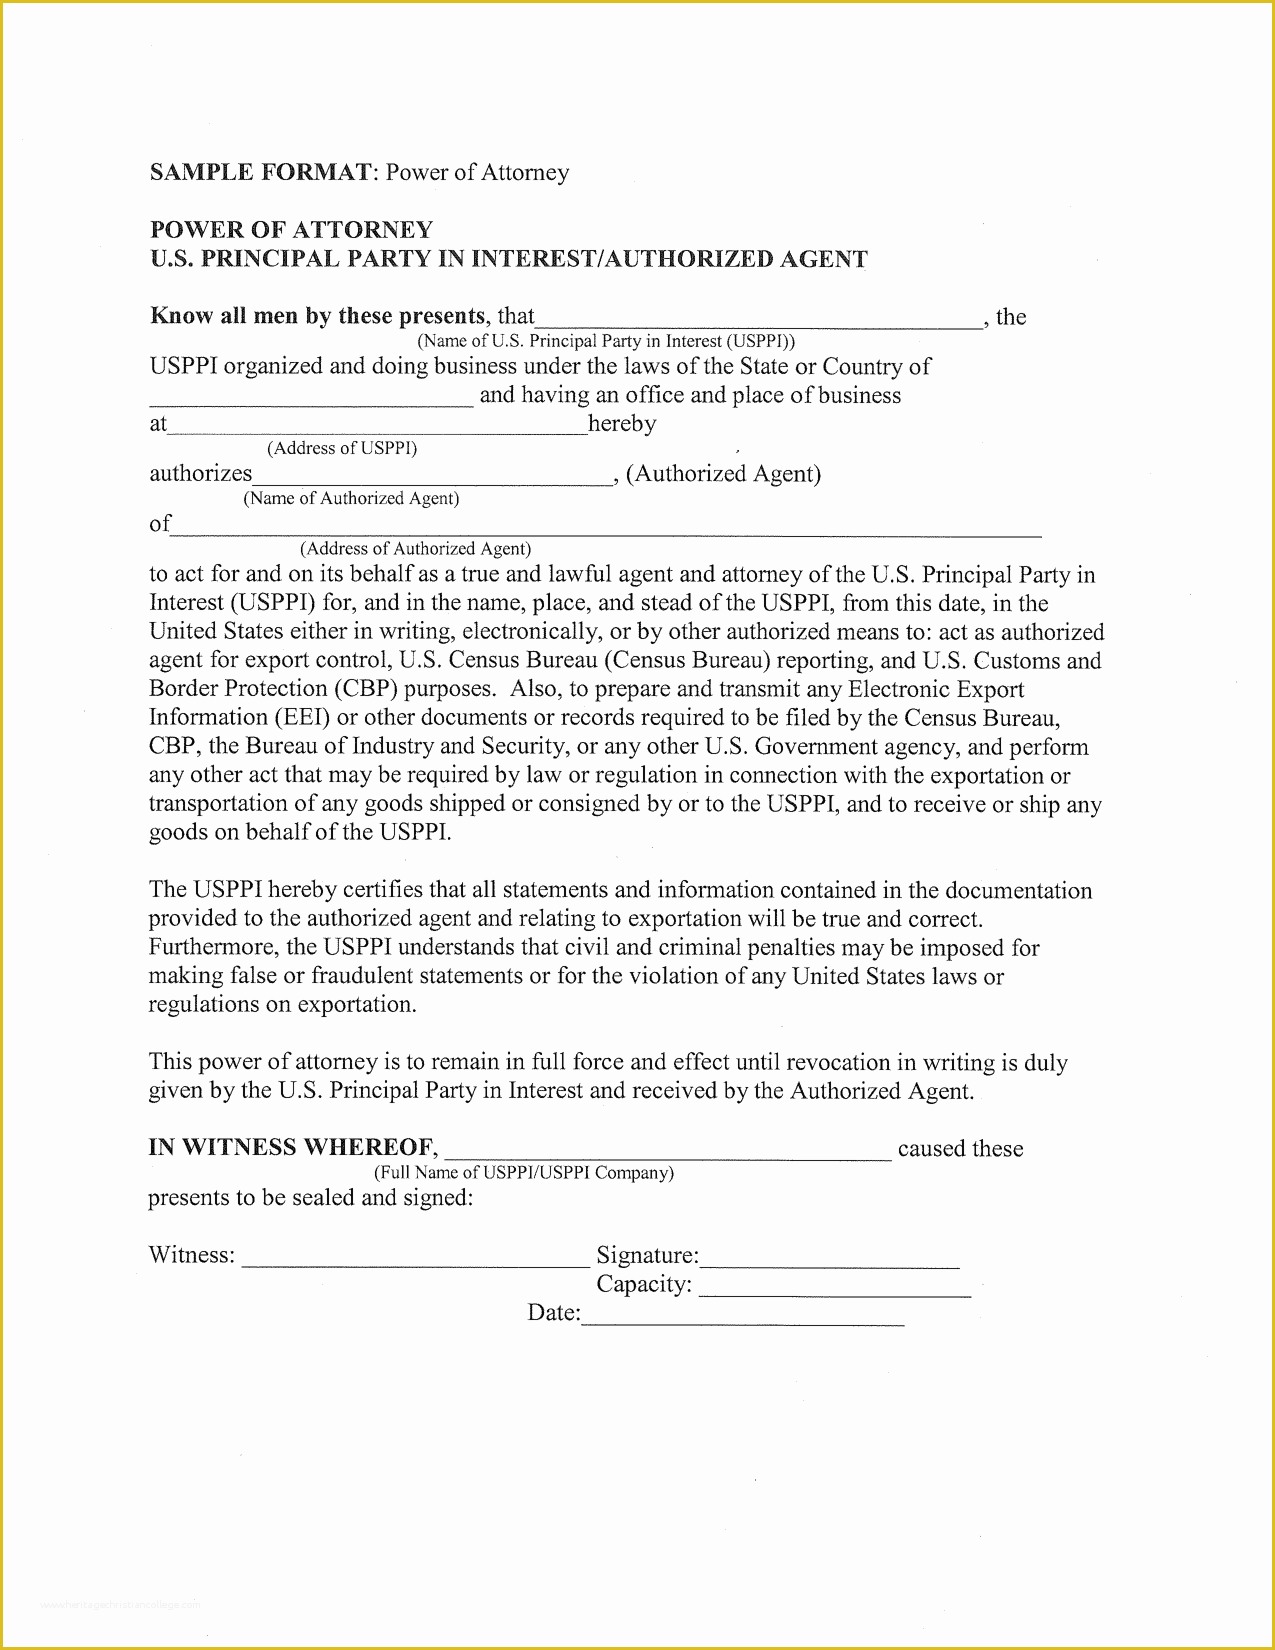 free-poa-template-of-power-attorney-template-heritagechristiancollege